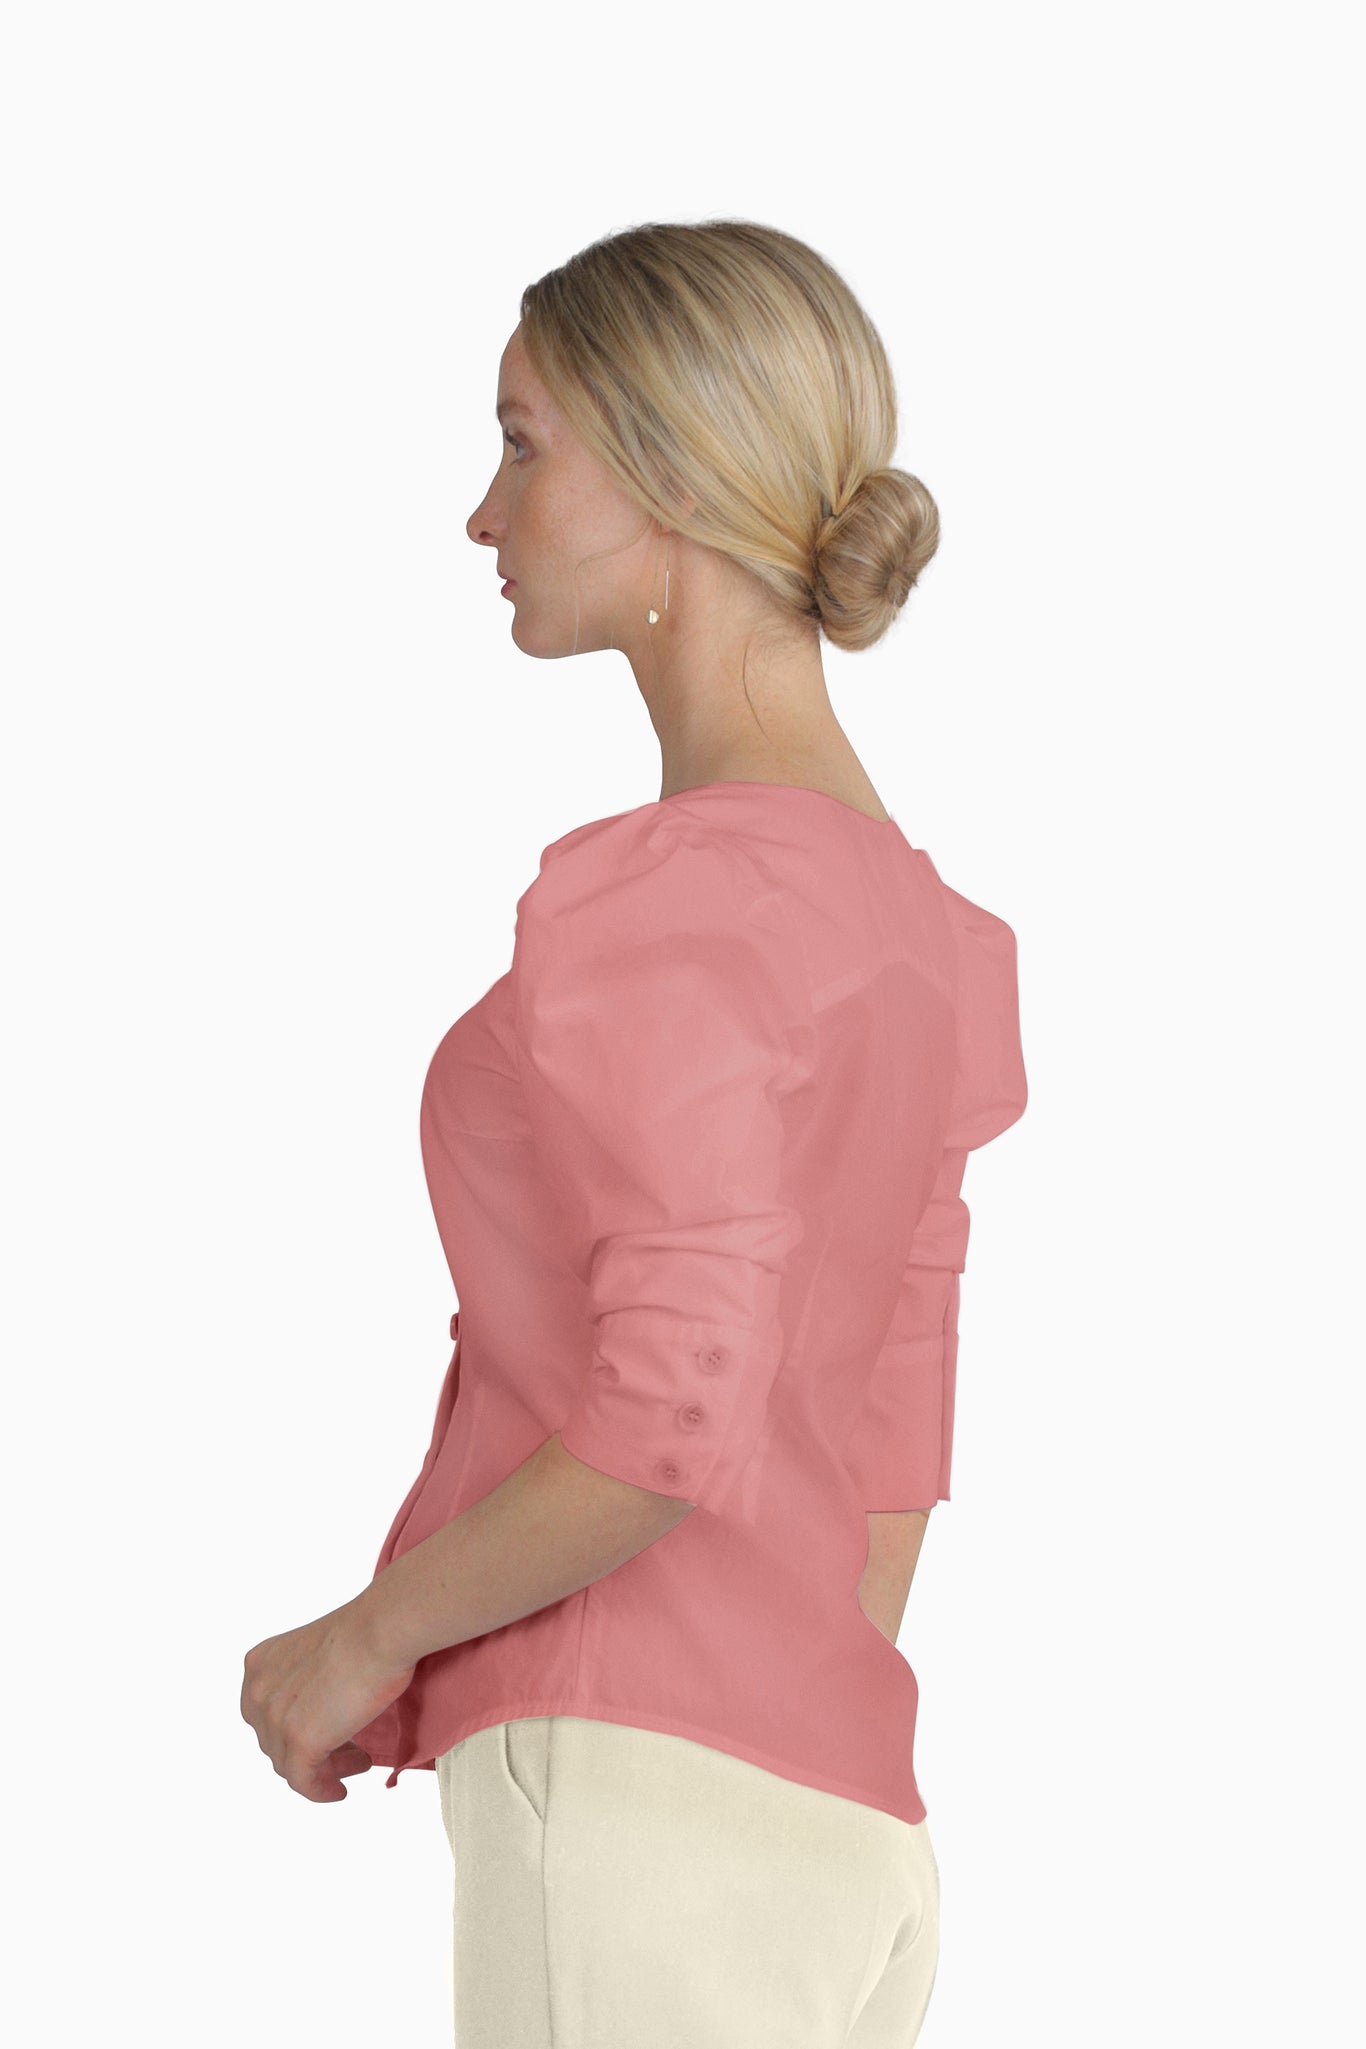 Seragyi's Martina Blouse in Mauveglow, a chic addition to Women's Clothing. Crafted from eco-friendly cotton, its asymmetrical neckline and ruched sleeves offer a unique and stylish look.